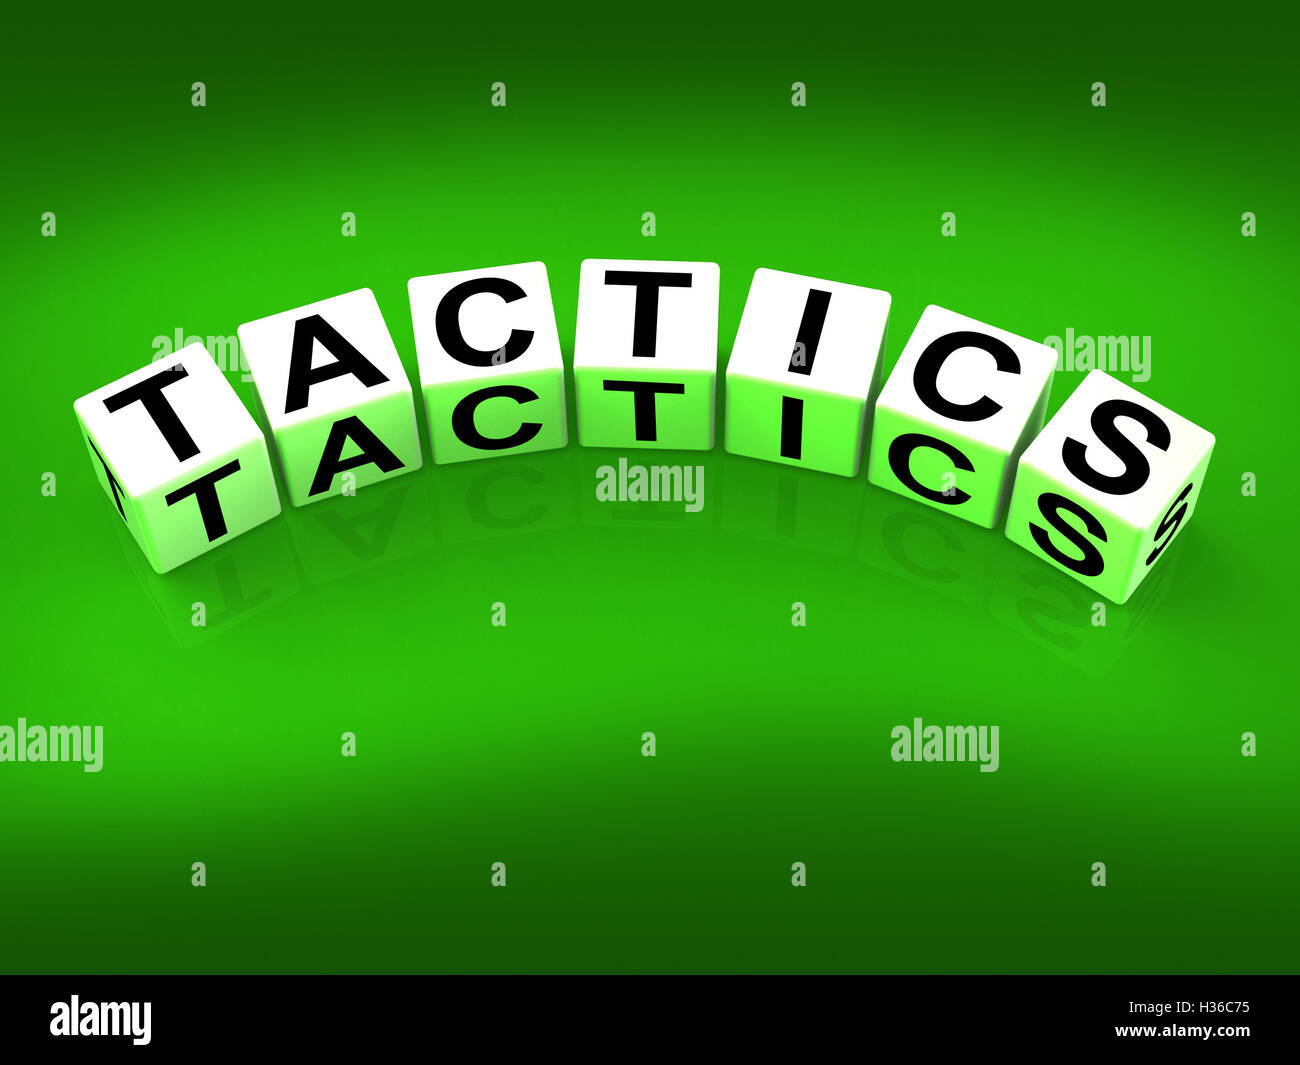 Tactics Blocks Show Strategy Approach and Technique Stock Photo